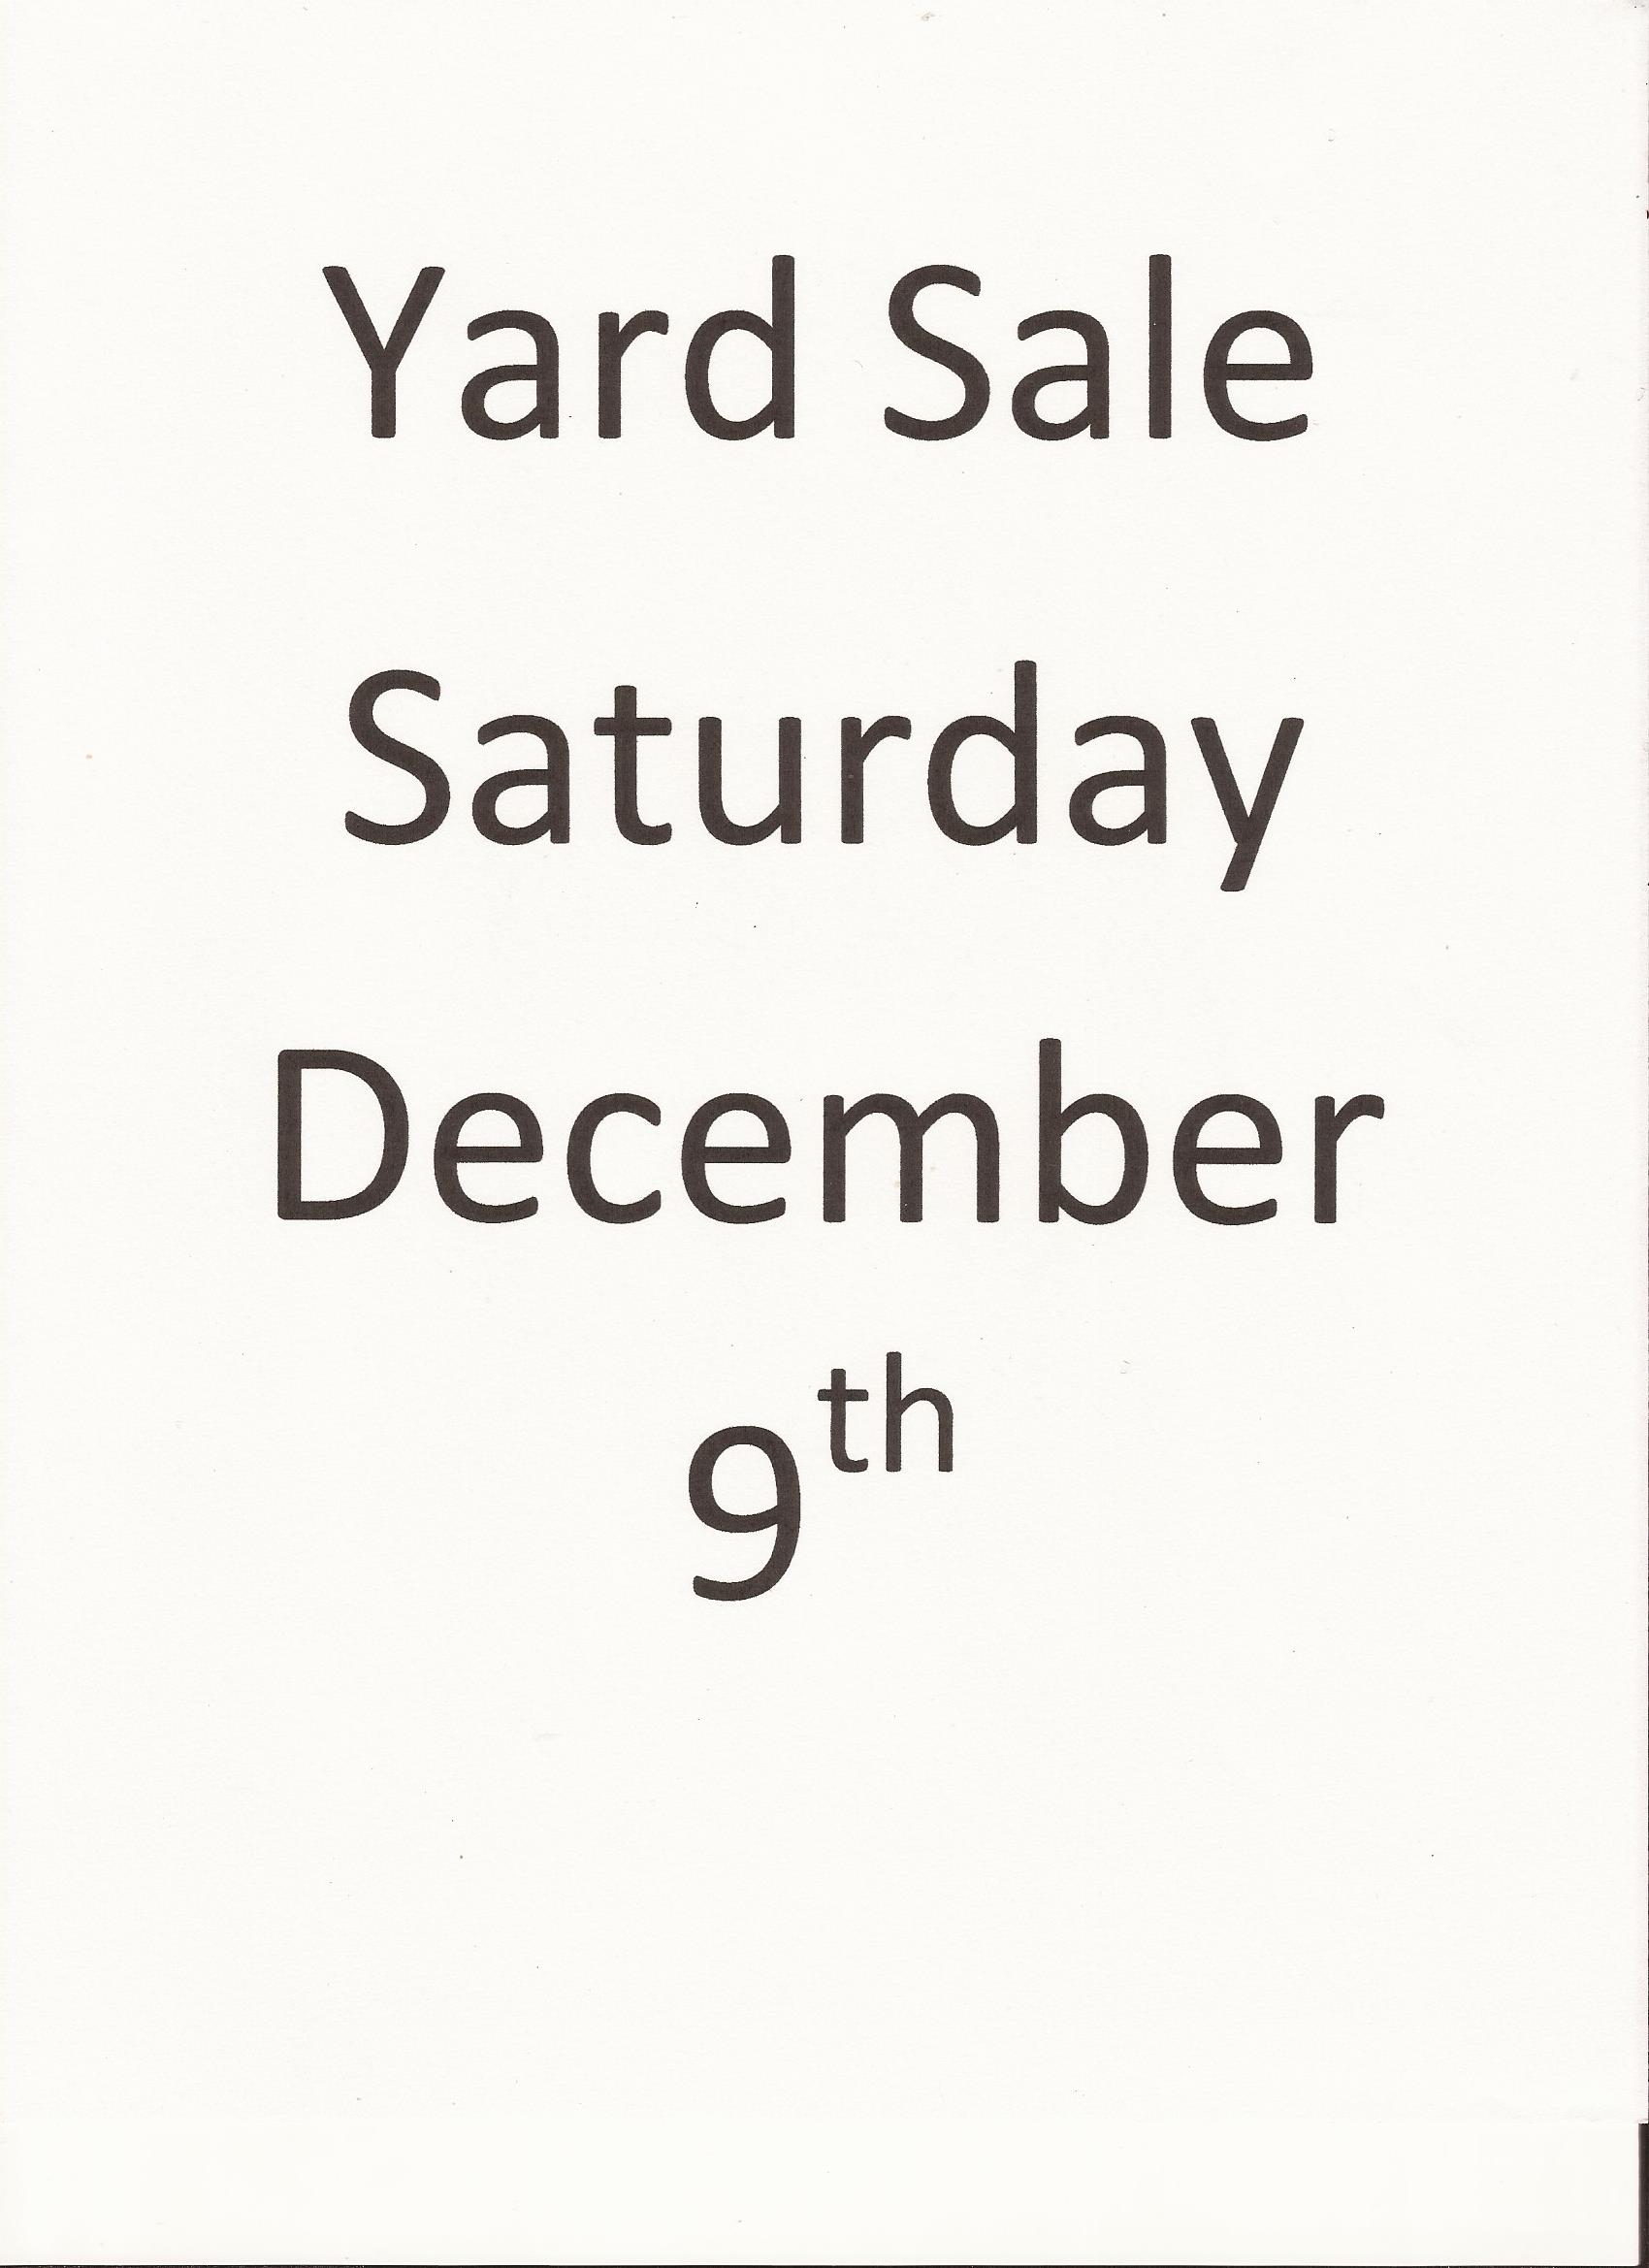 Scan of part of the Yard sale sign I made